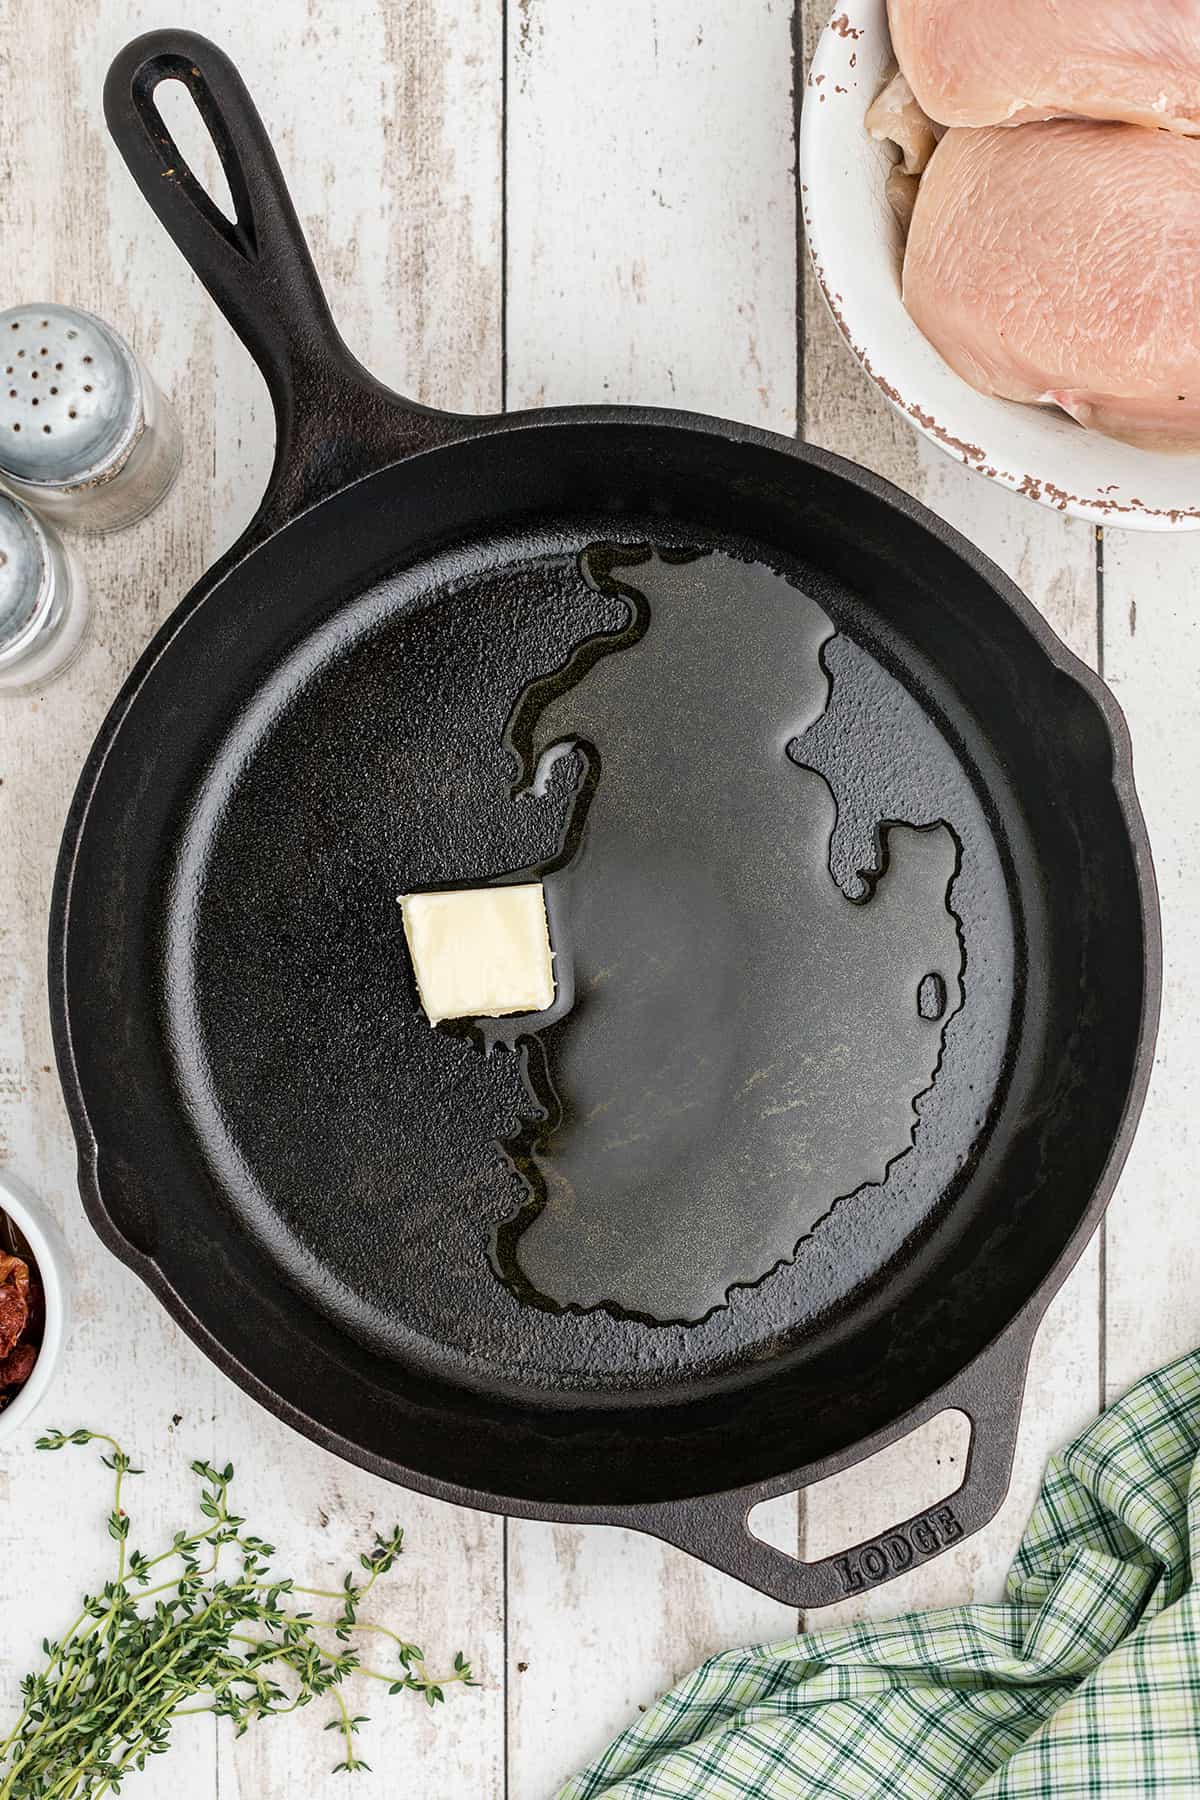 Butter and oil in a cast iron skillet.